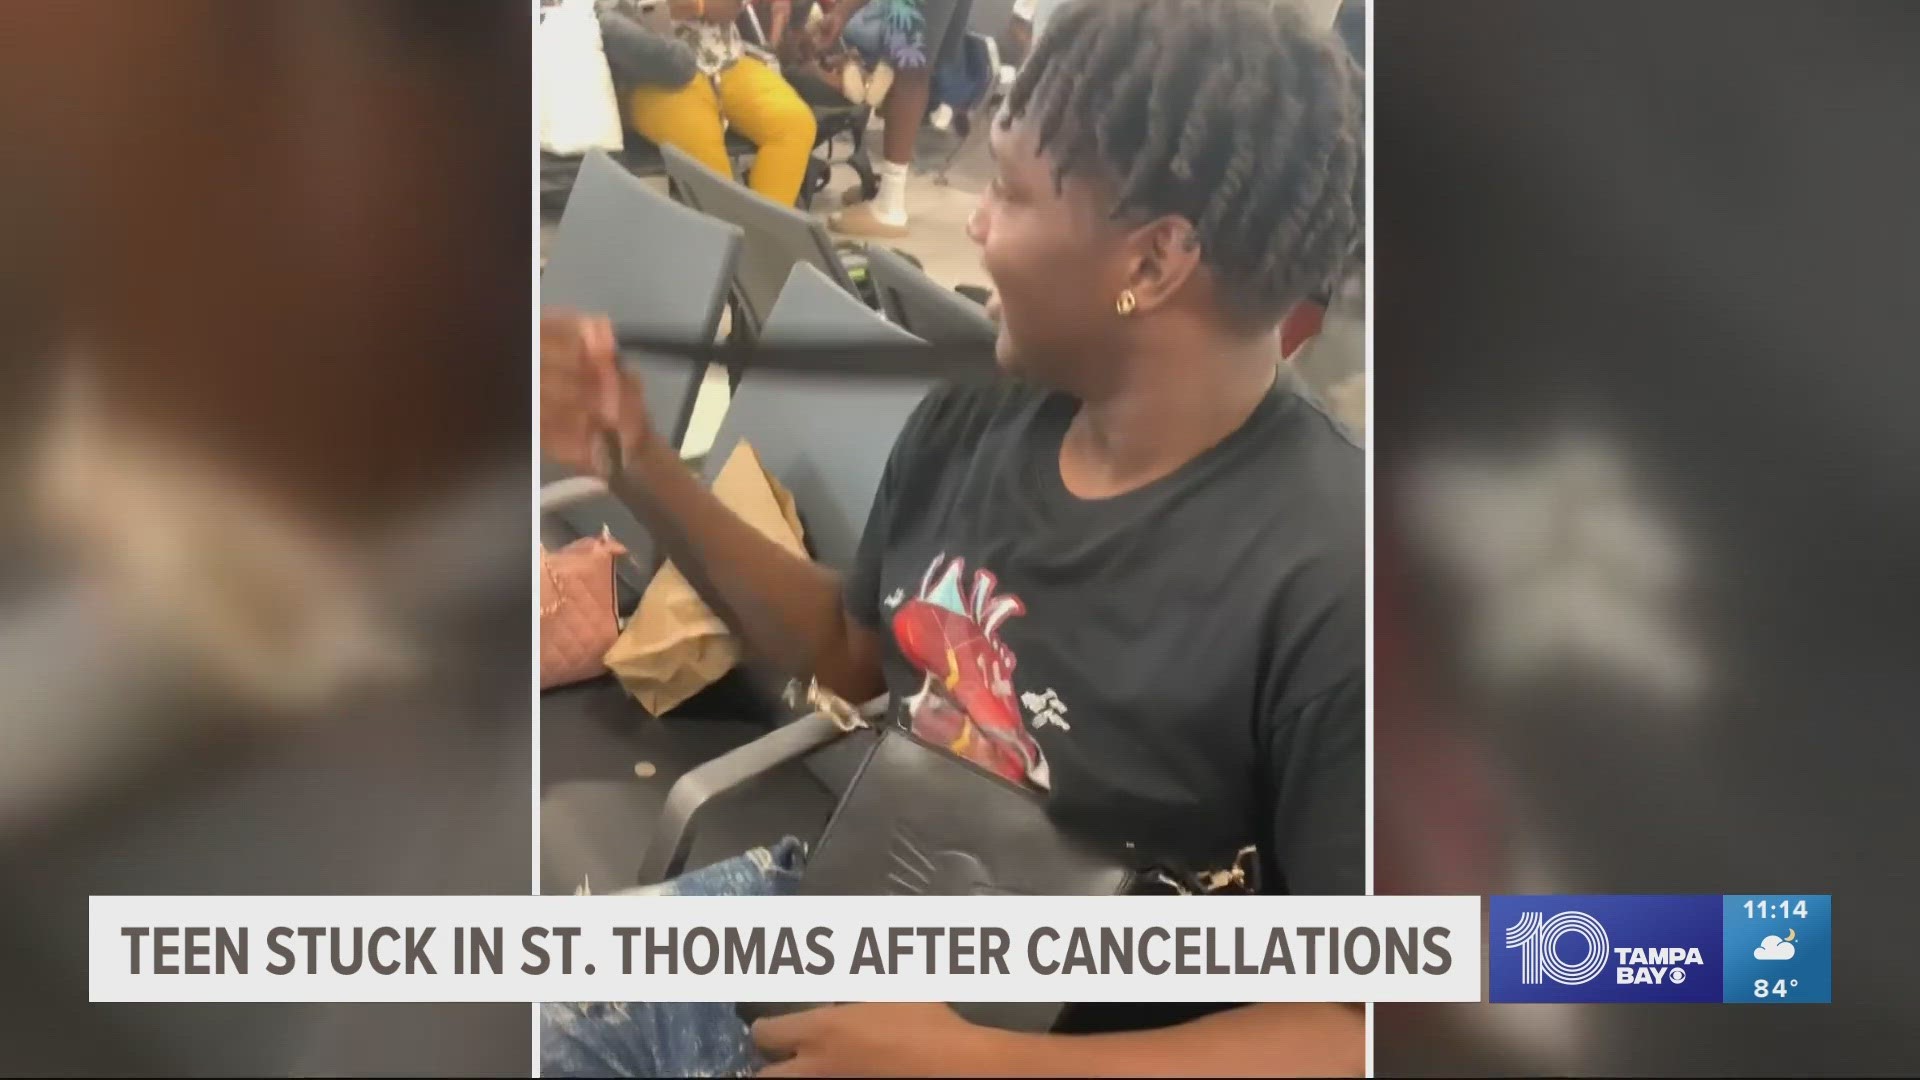 The 17-year-old was originally scheduled to leave St. Thomas Tuesday, but multiple delays led to a cancellation and an extended stay.